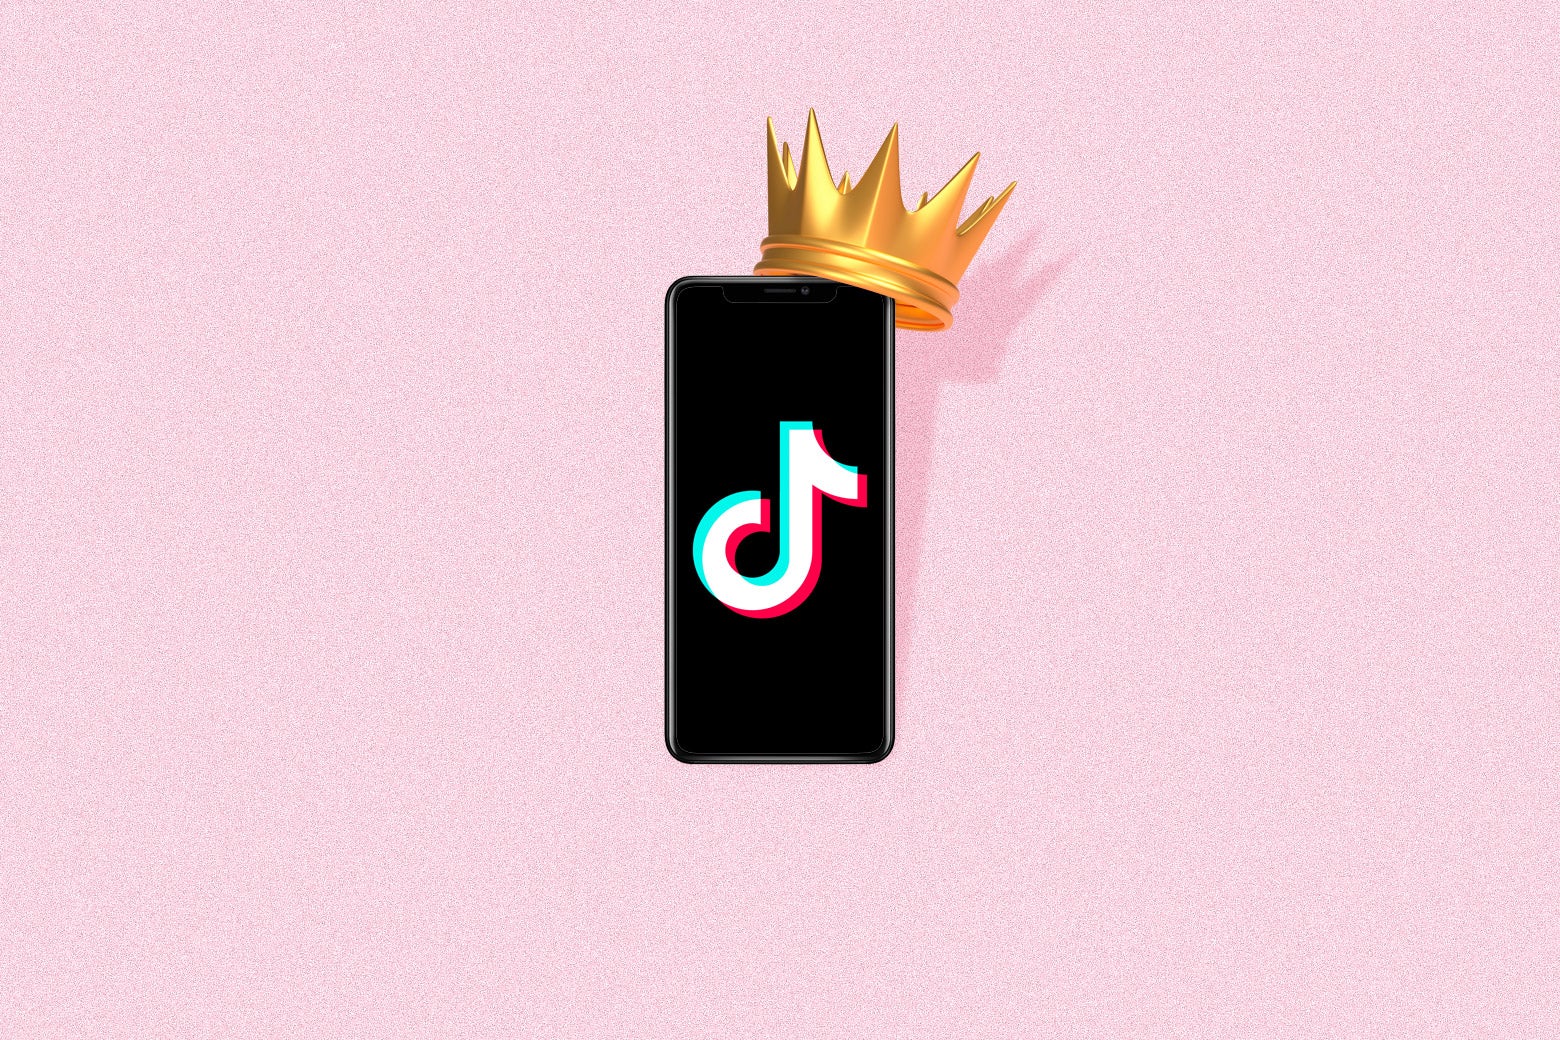 A phone displaying the TikTok logo is wearing a crown against a princess-pink background.